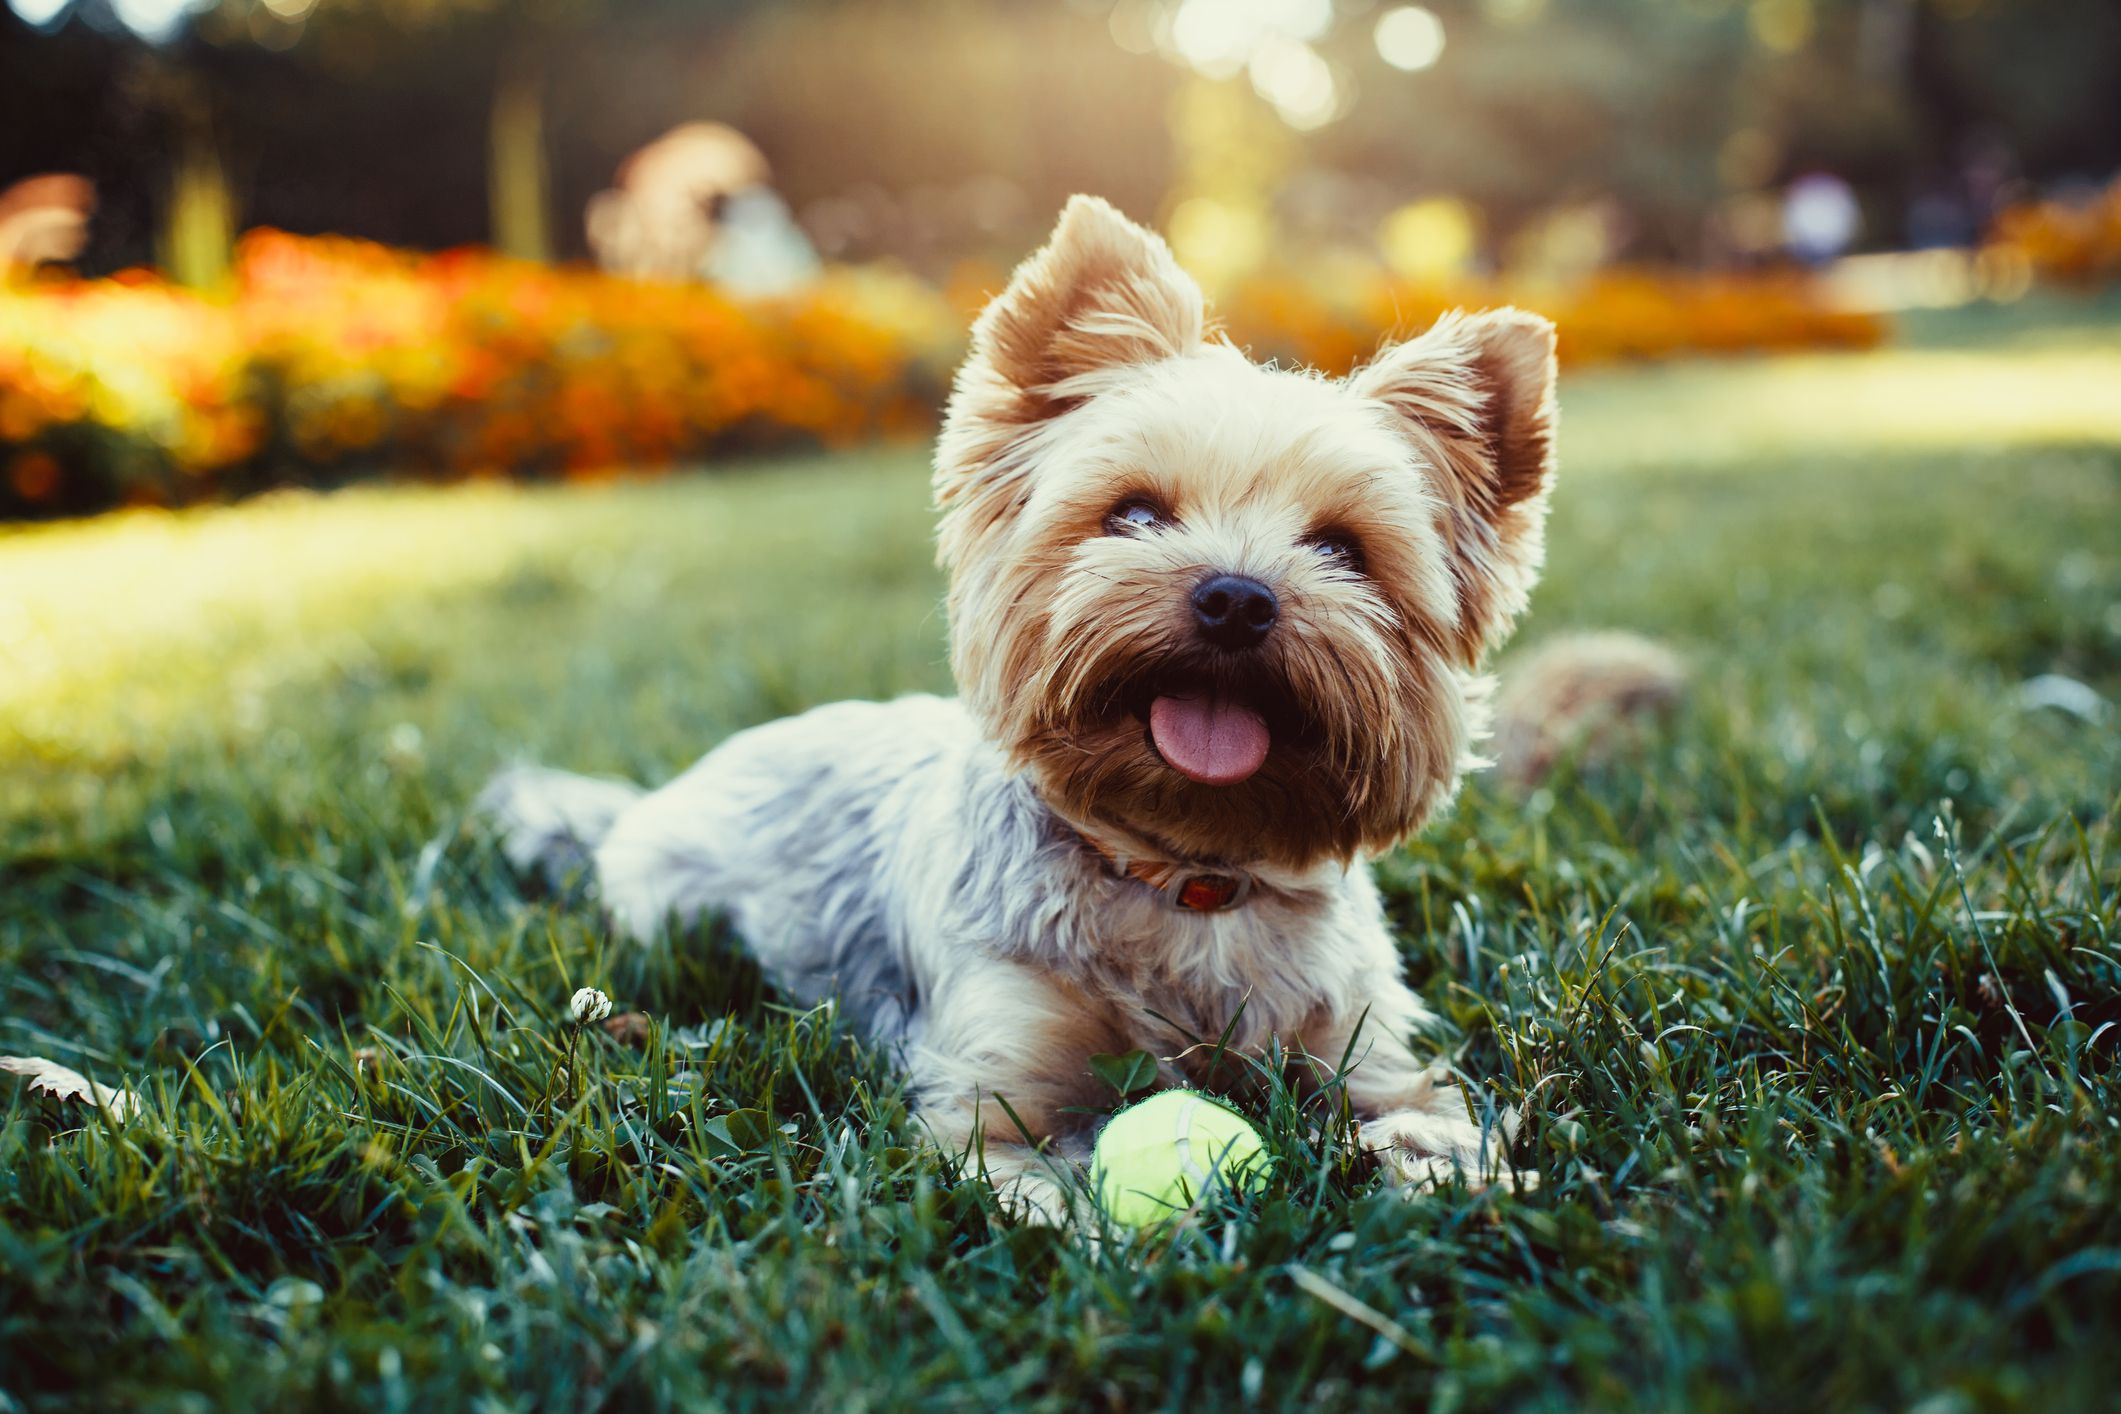 10 great things to do with your dog in 2018 for a healthy, happy pet